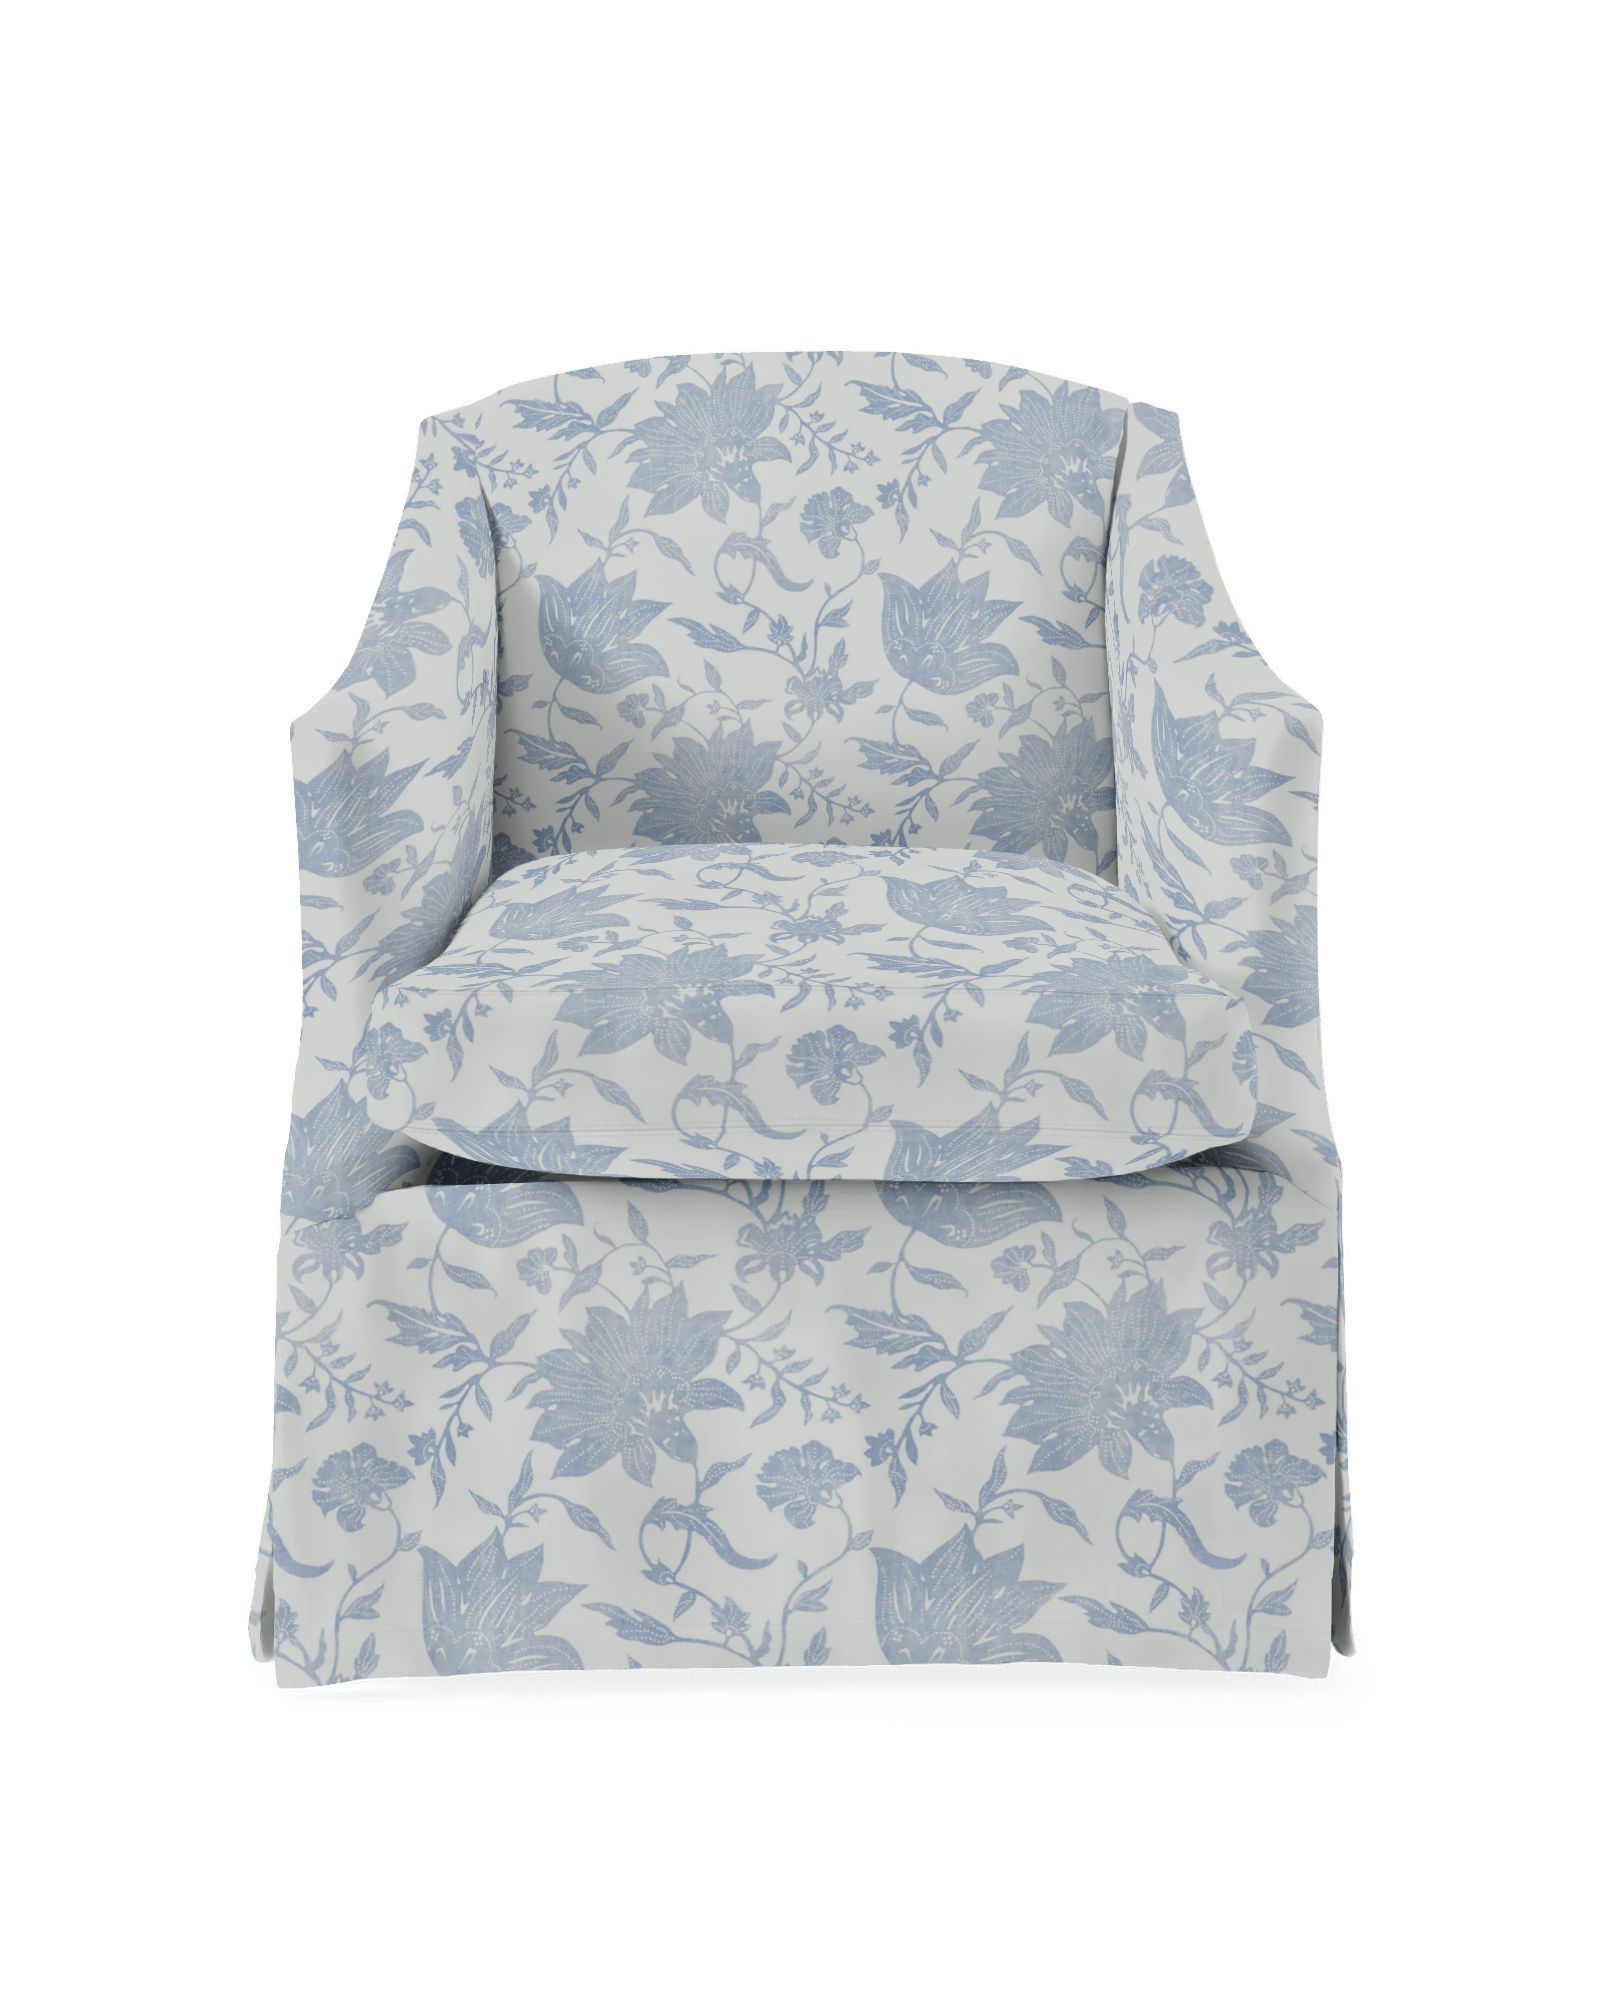 Hinsdale Swivel Chair | Serena and Lily